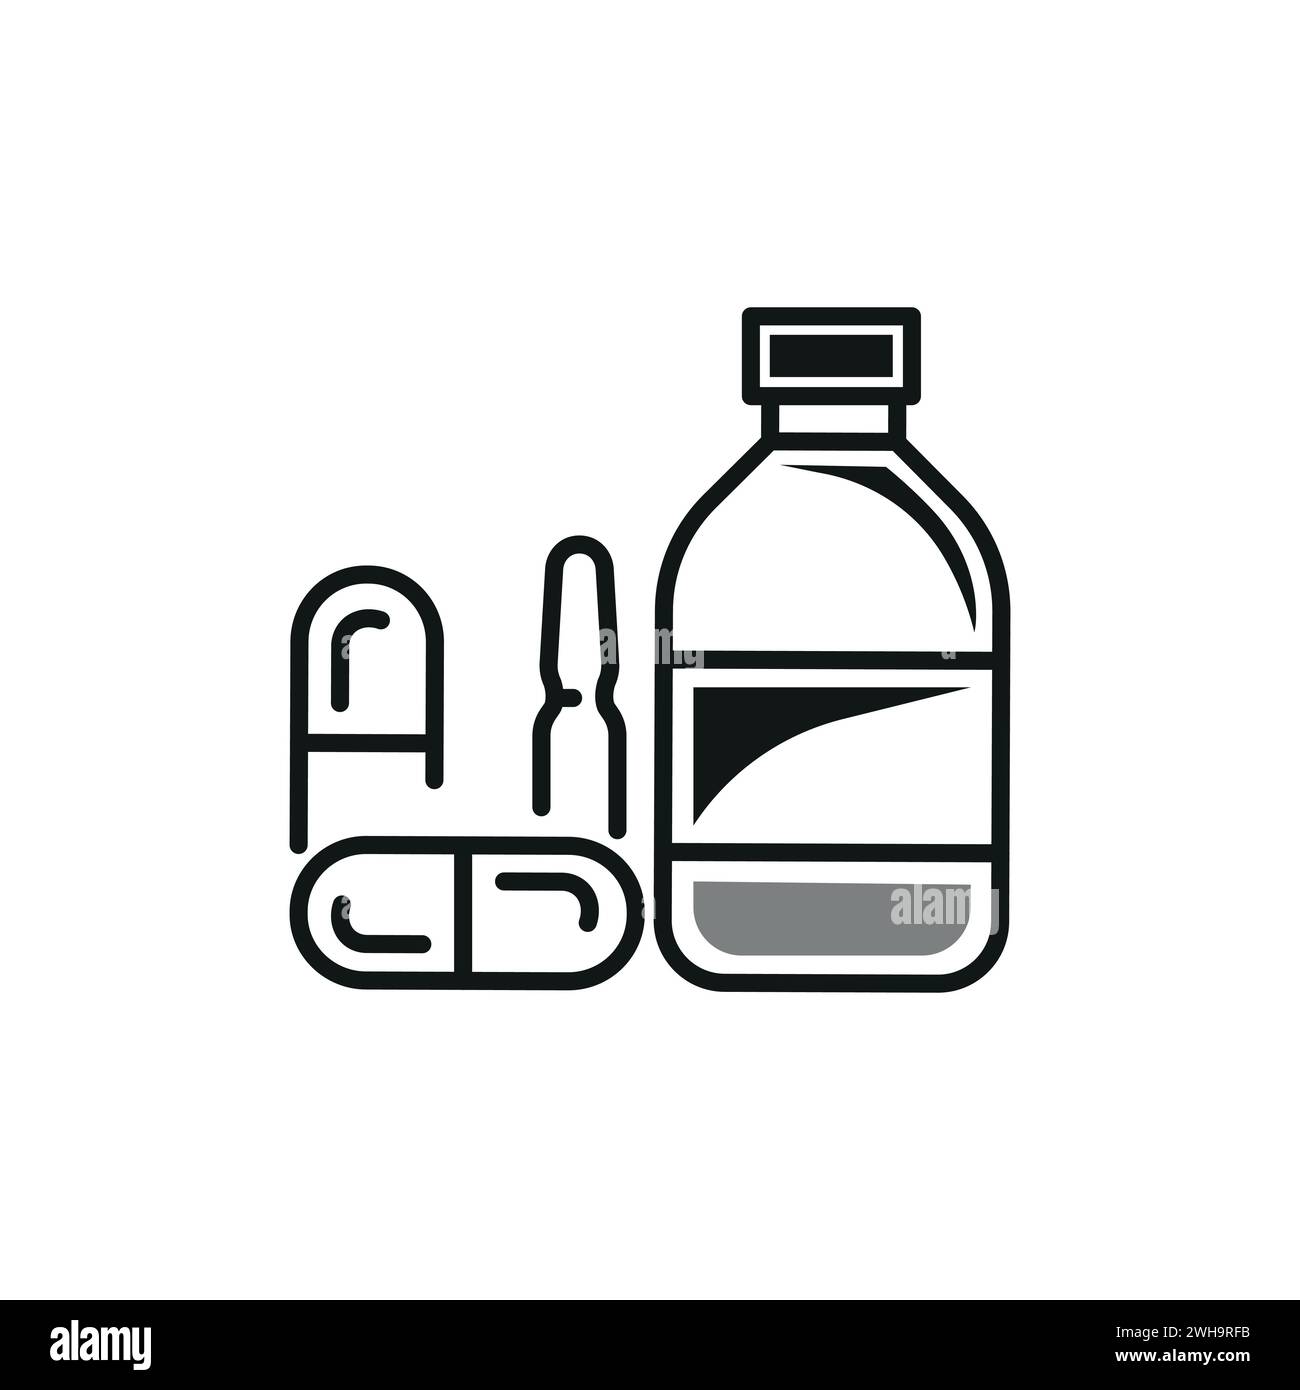 Medical health care icons objects used in hospitals and medical shops, men, women, medical icons Stock Vector